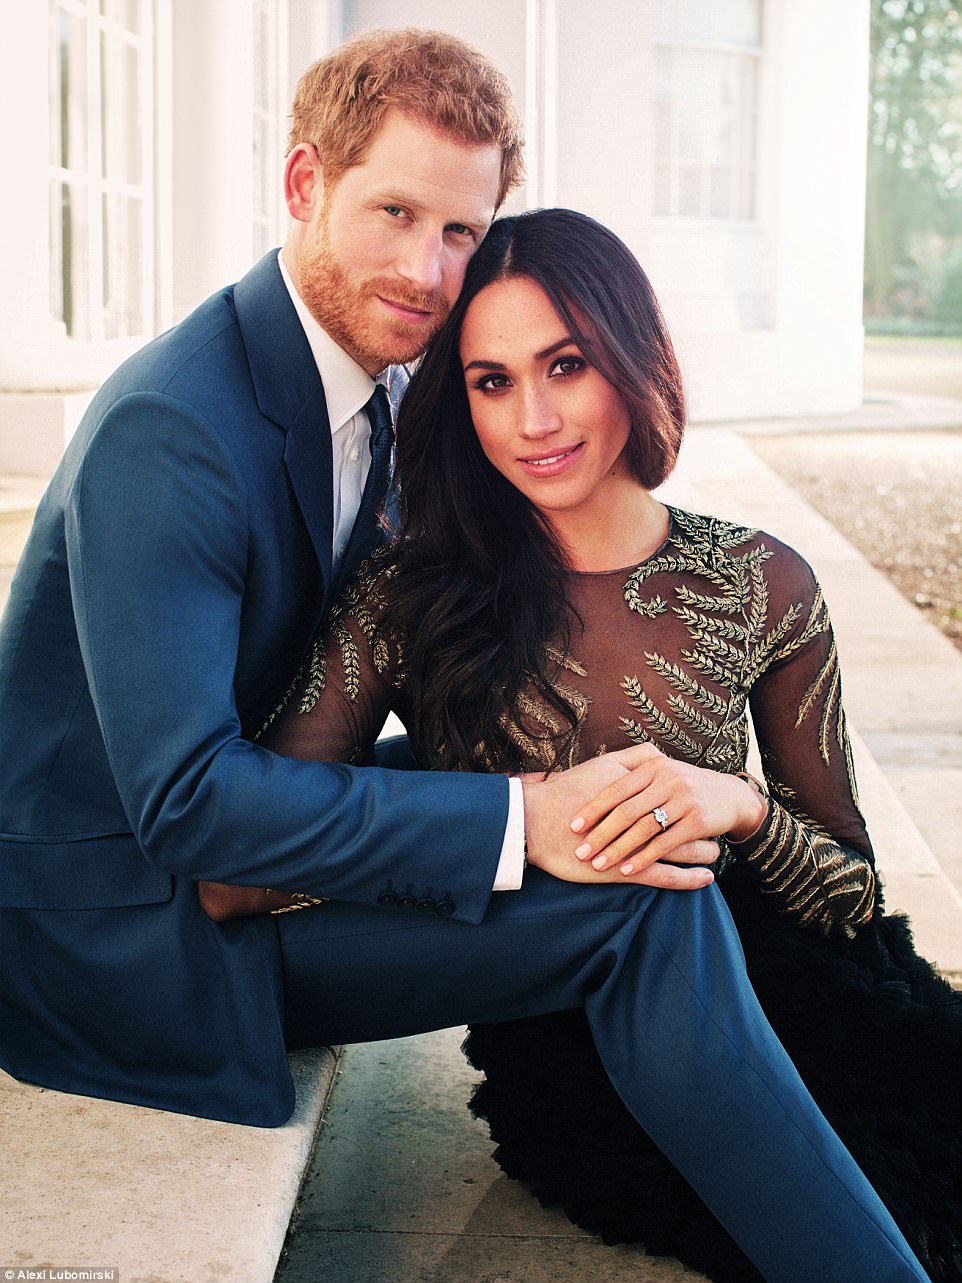 477F9C5000000578-5201959-One_of_the_two_photographs_of_Prince_Harry_and_Meghan_Markle_tak-a-127_1513860095495.jpg